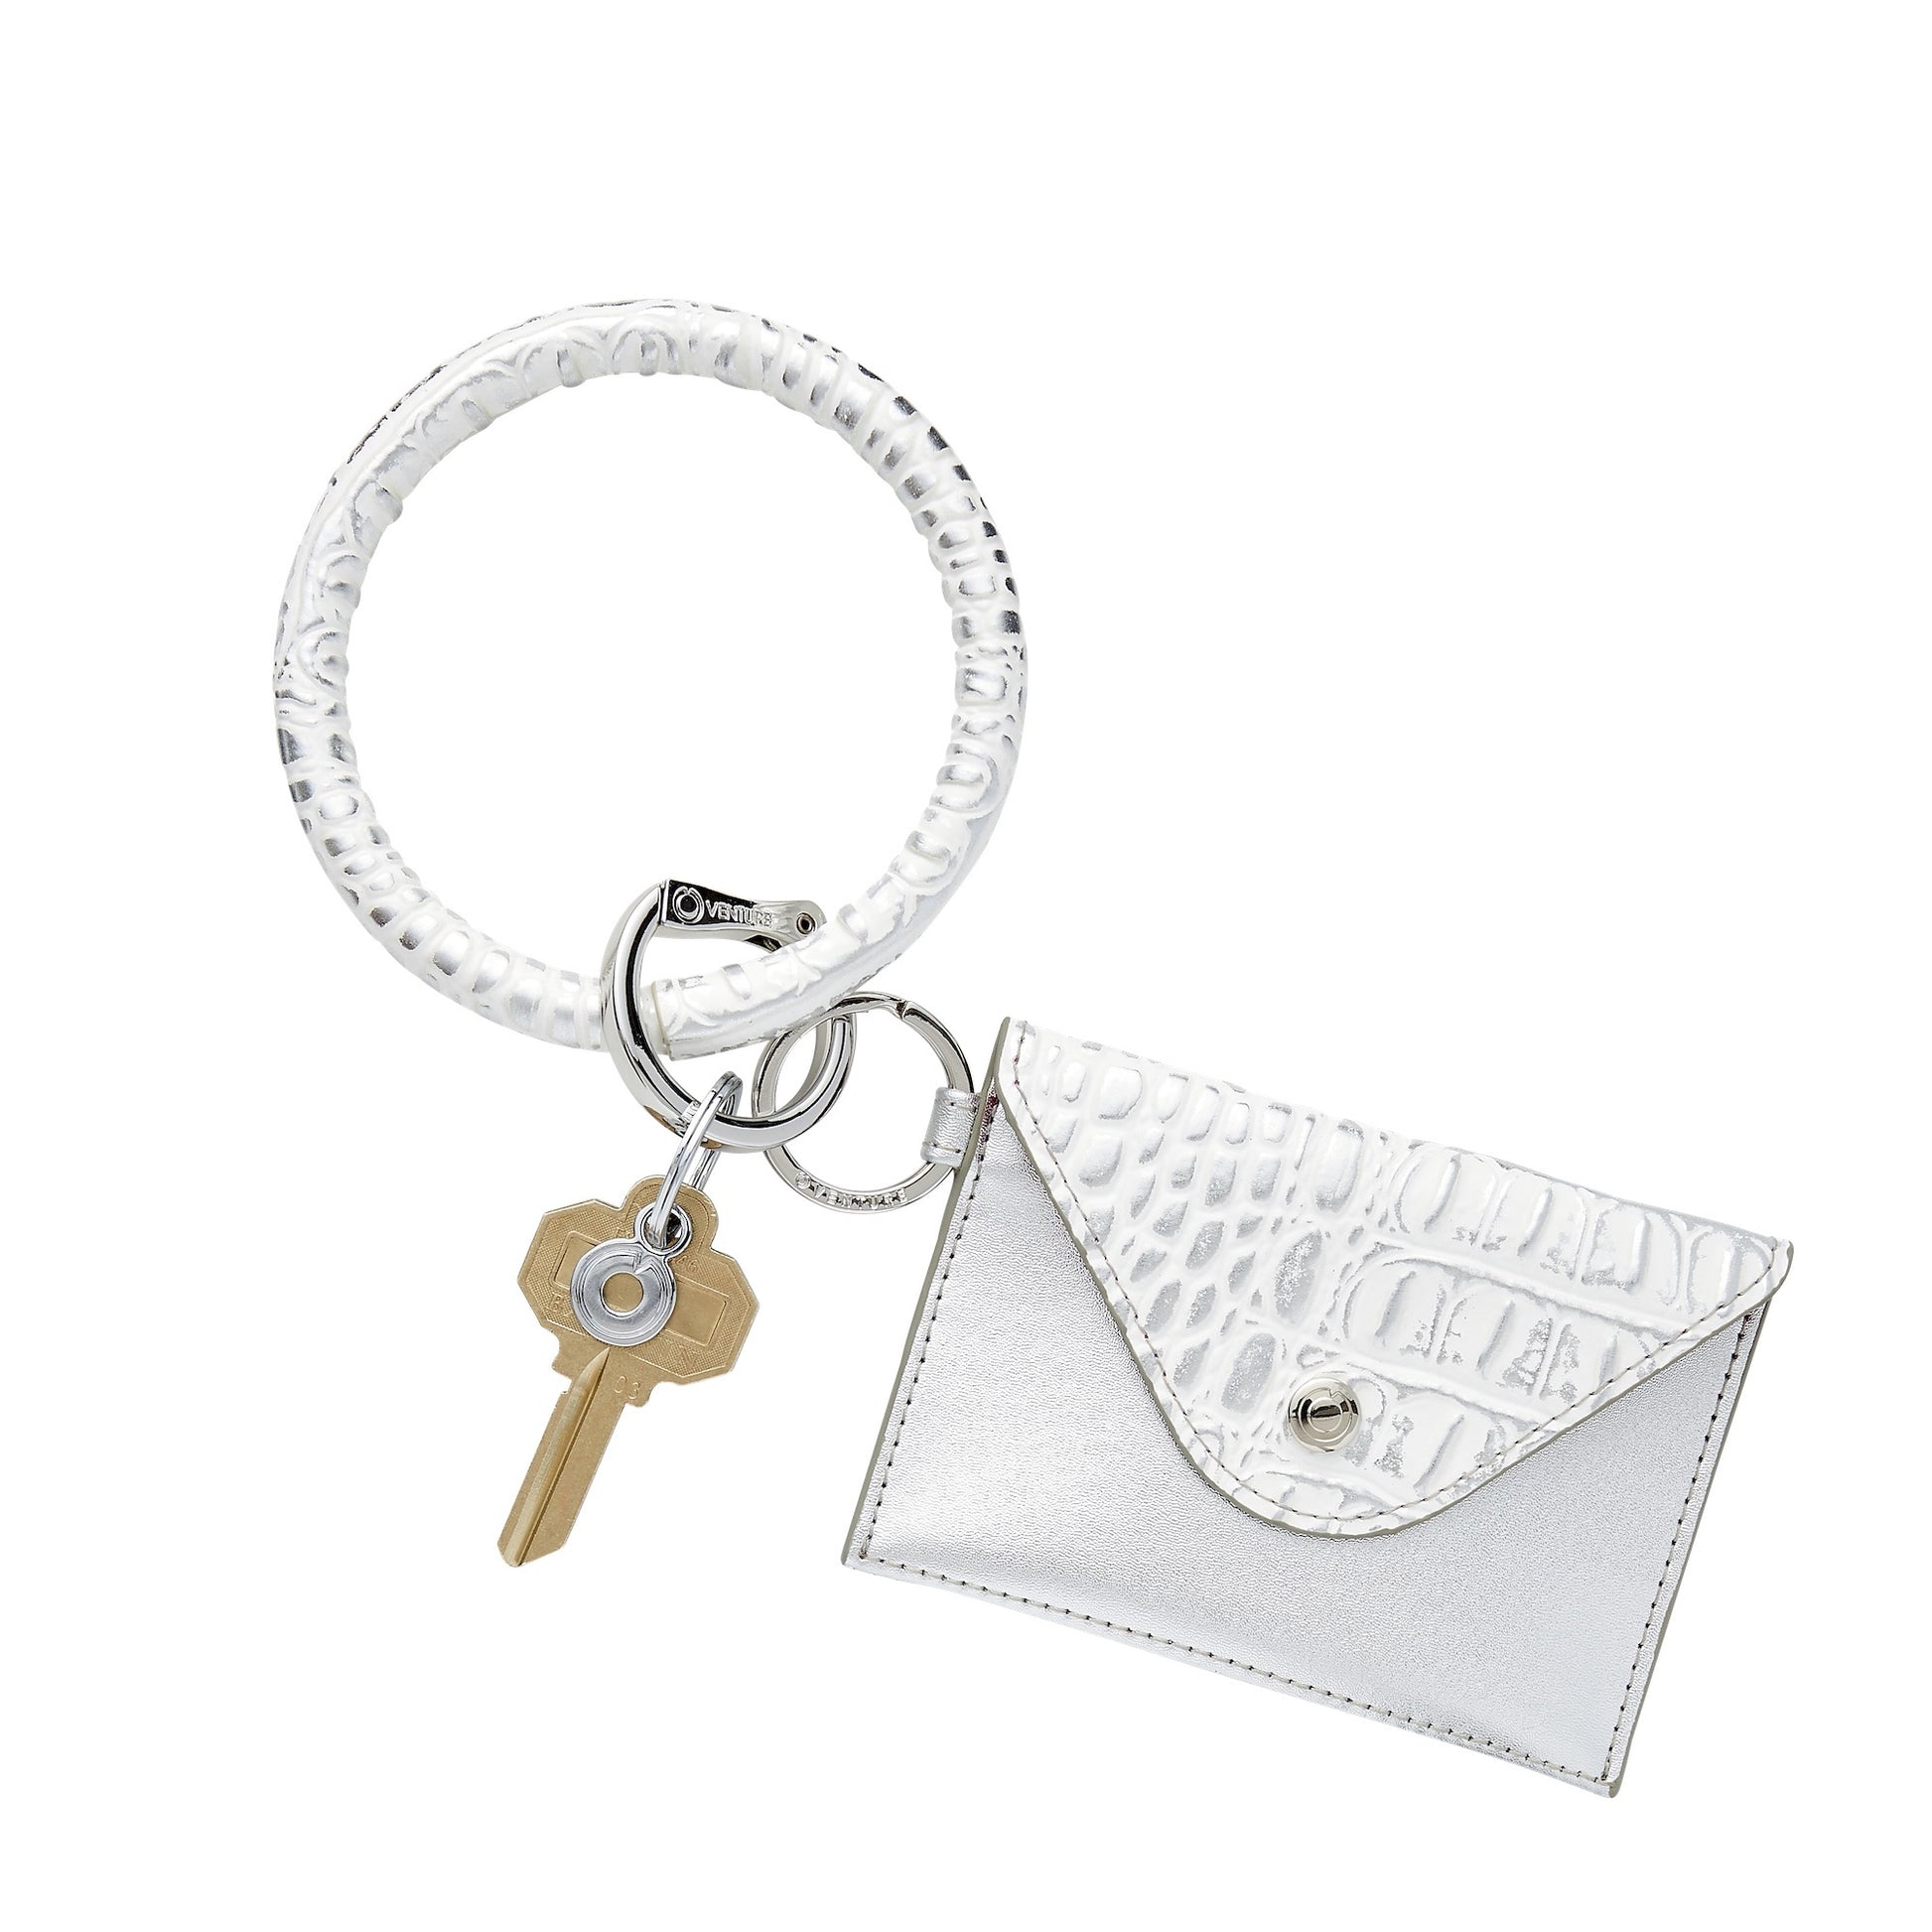 Leather Quicksilver Croc-Embossed - Mini Envelope Wallet - Oventure. Attached to the Silver croc embossed Big O Key Ring.